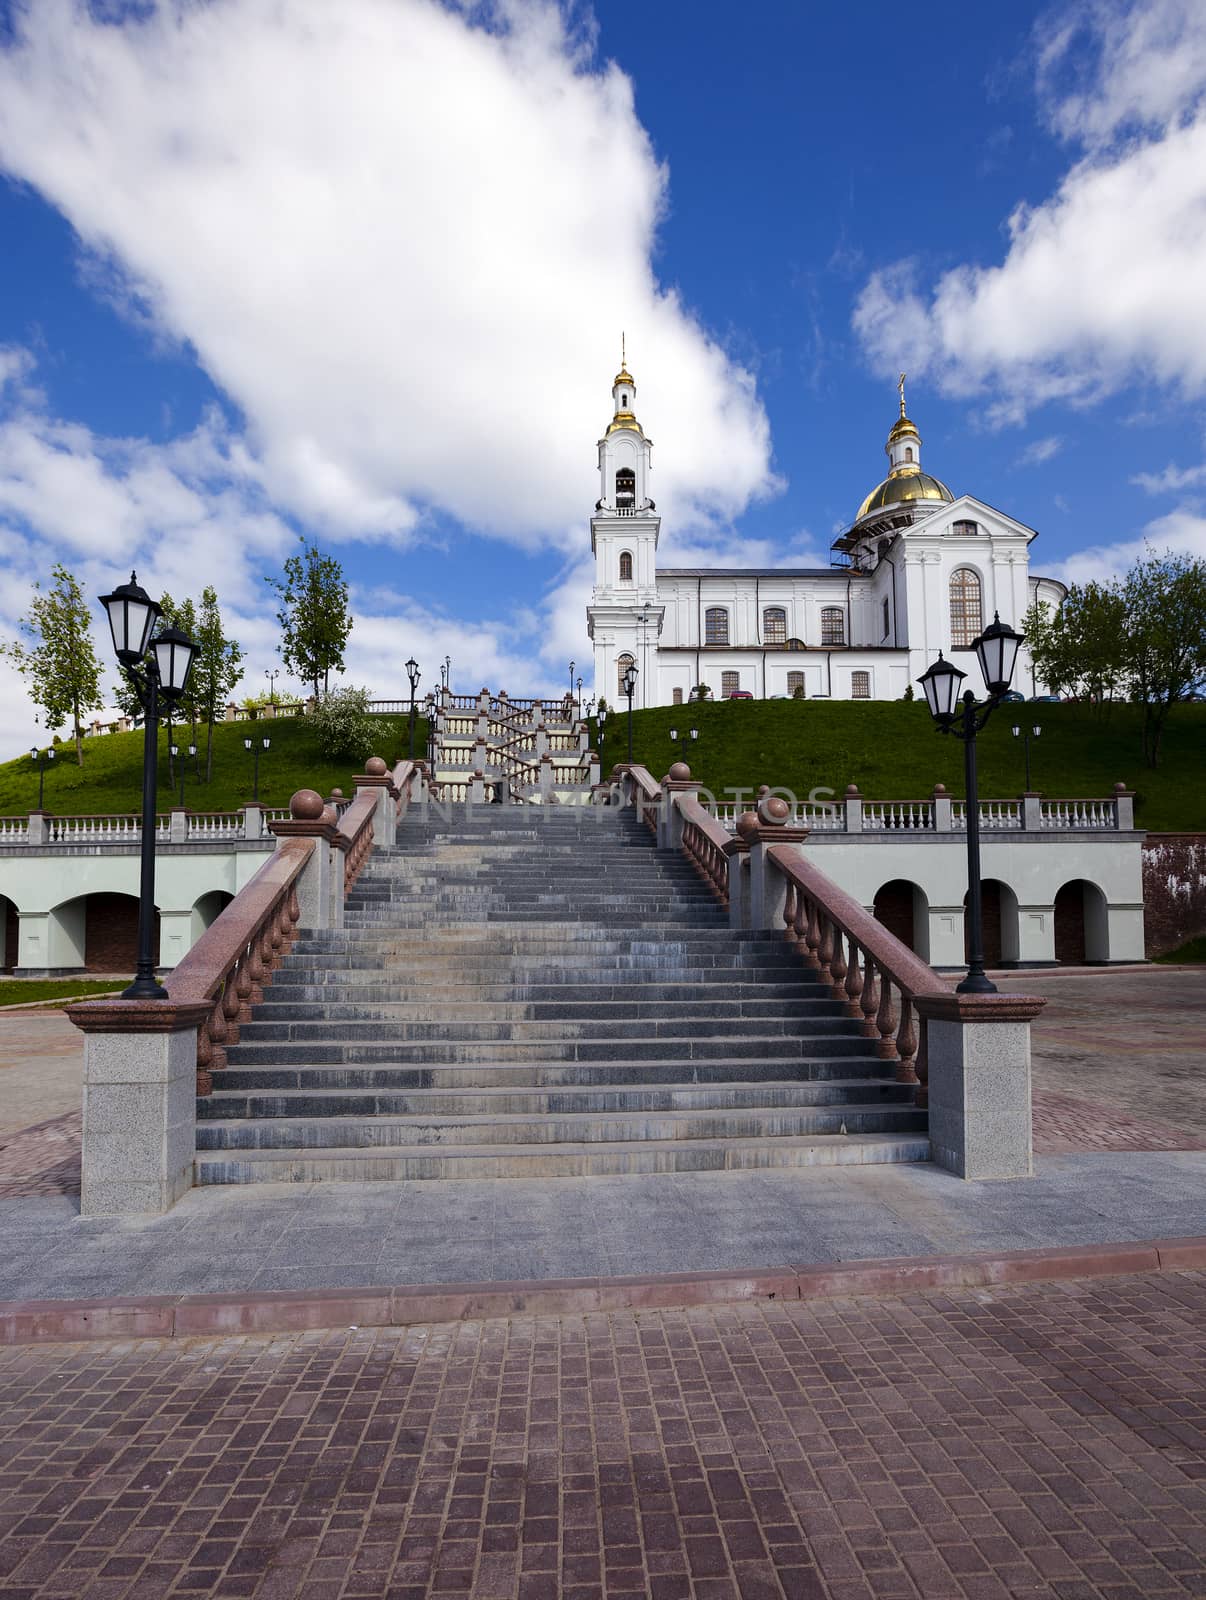   located on a hill church to which a staircase. Belarus.